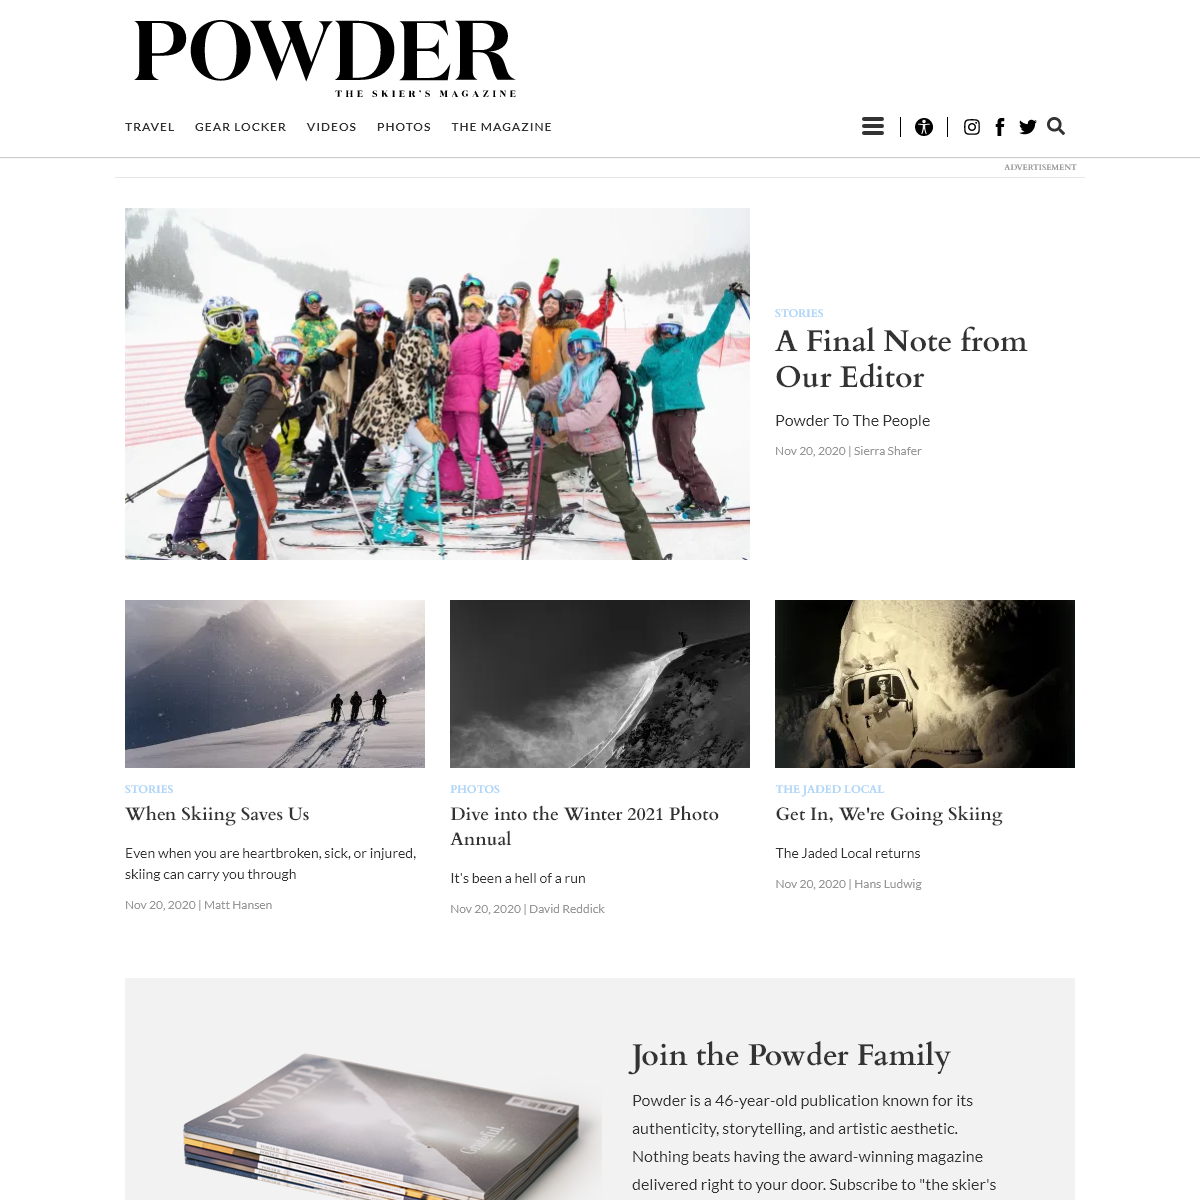 A complete backup of powdermag.com